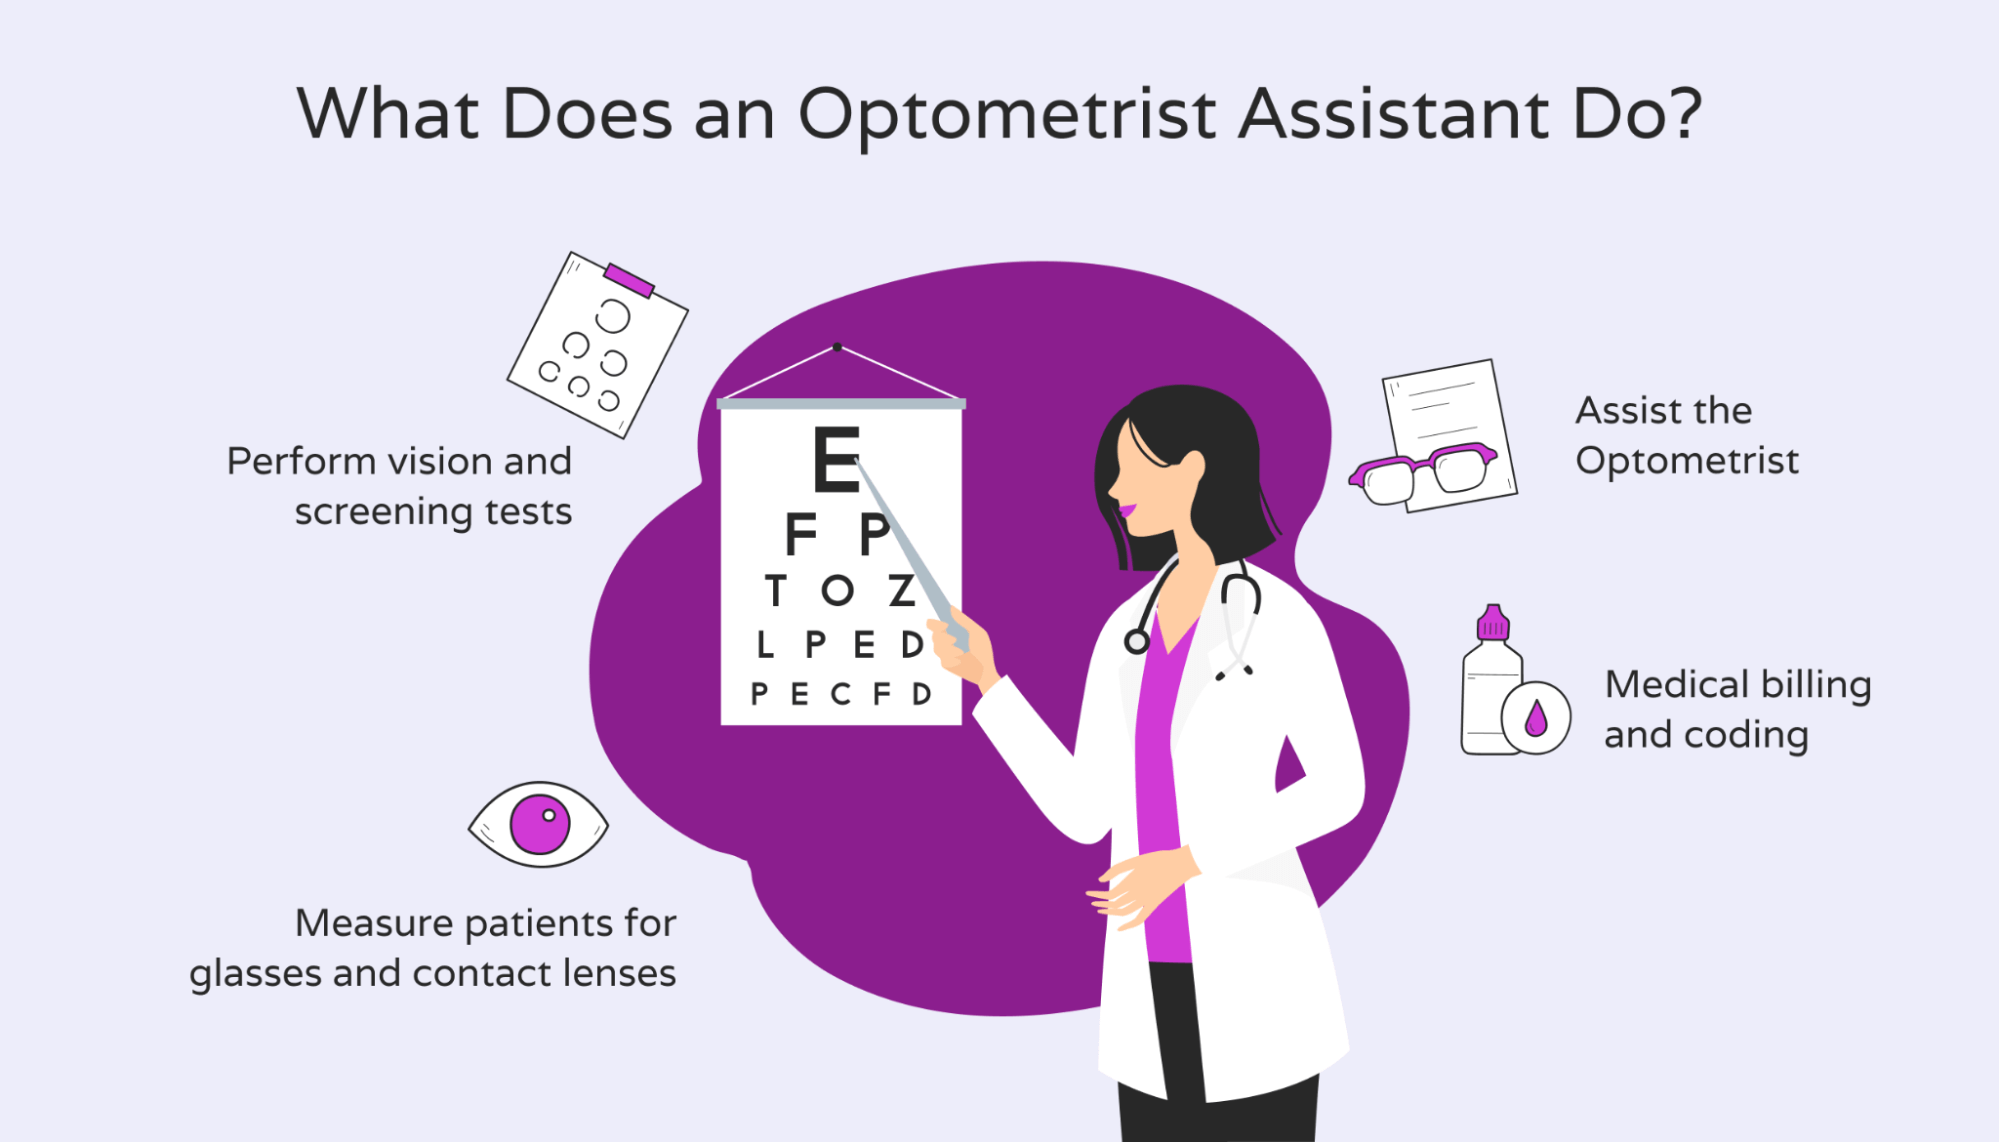 Daily responsibilities of an Optometrist Assistant.